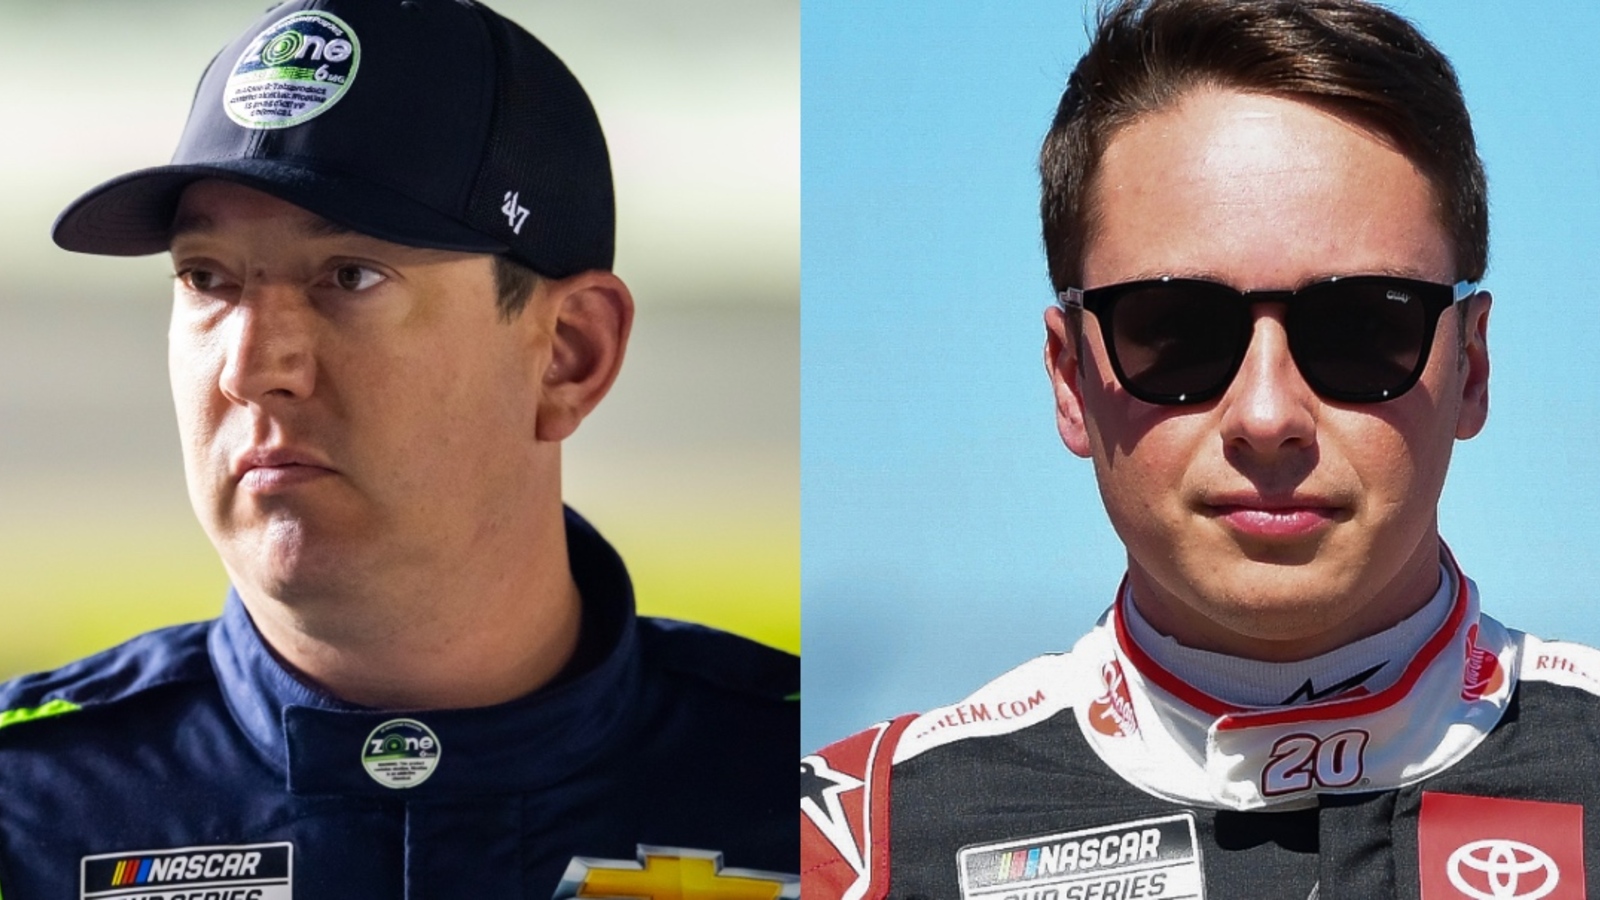 Kyle Busch plans to make Christopher Bell ‘sorry on the race track’